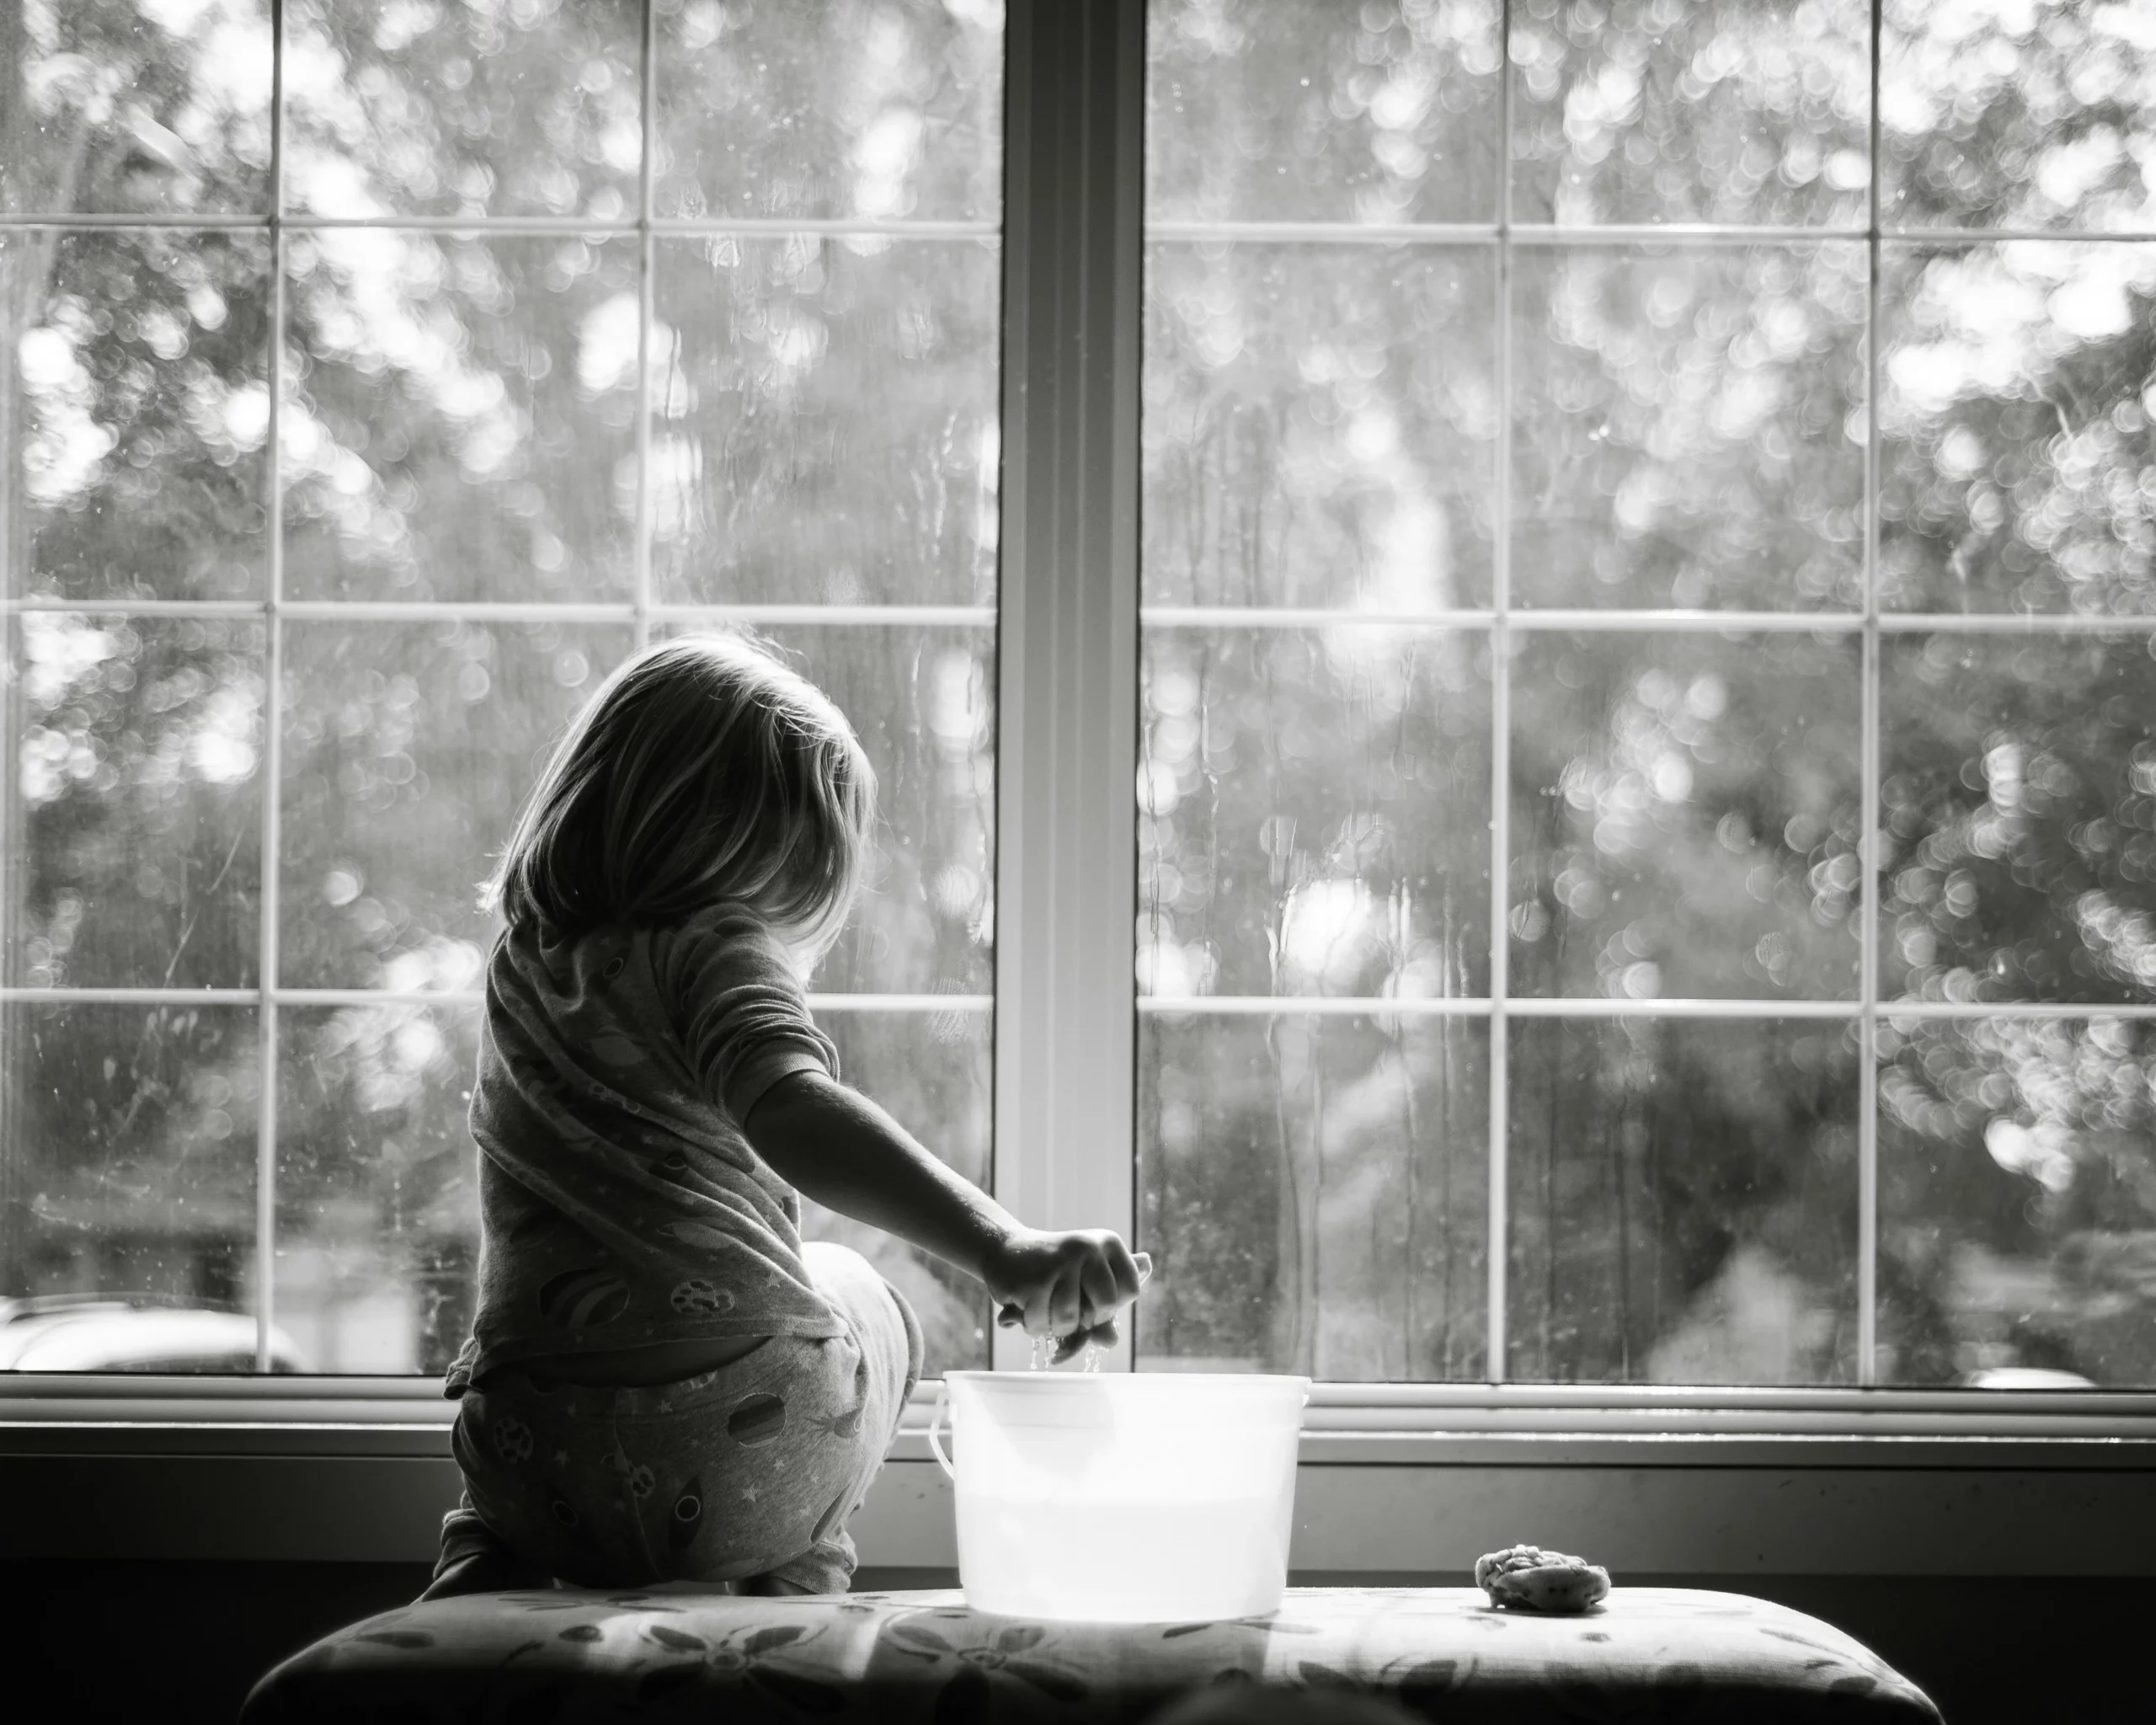 A little girl is washing a window in a greyscale image. ADHD cleaning tips include getting the whole family on board!